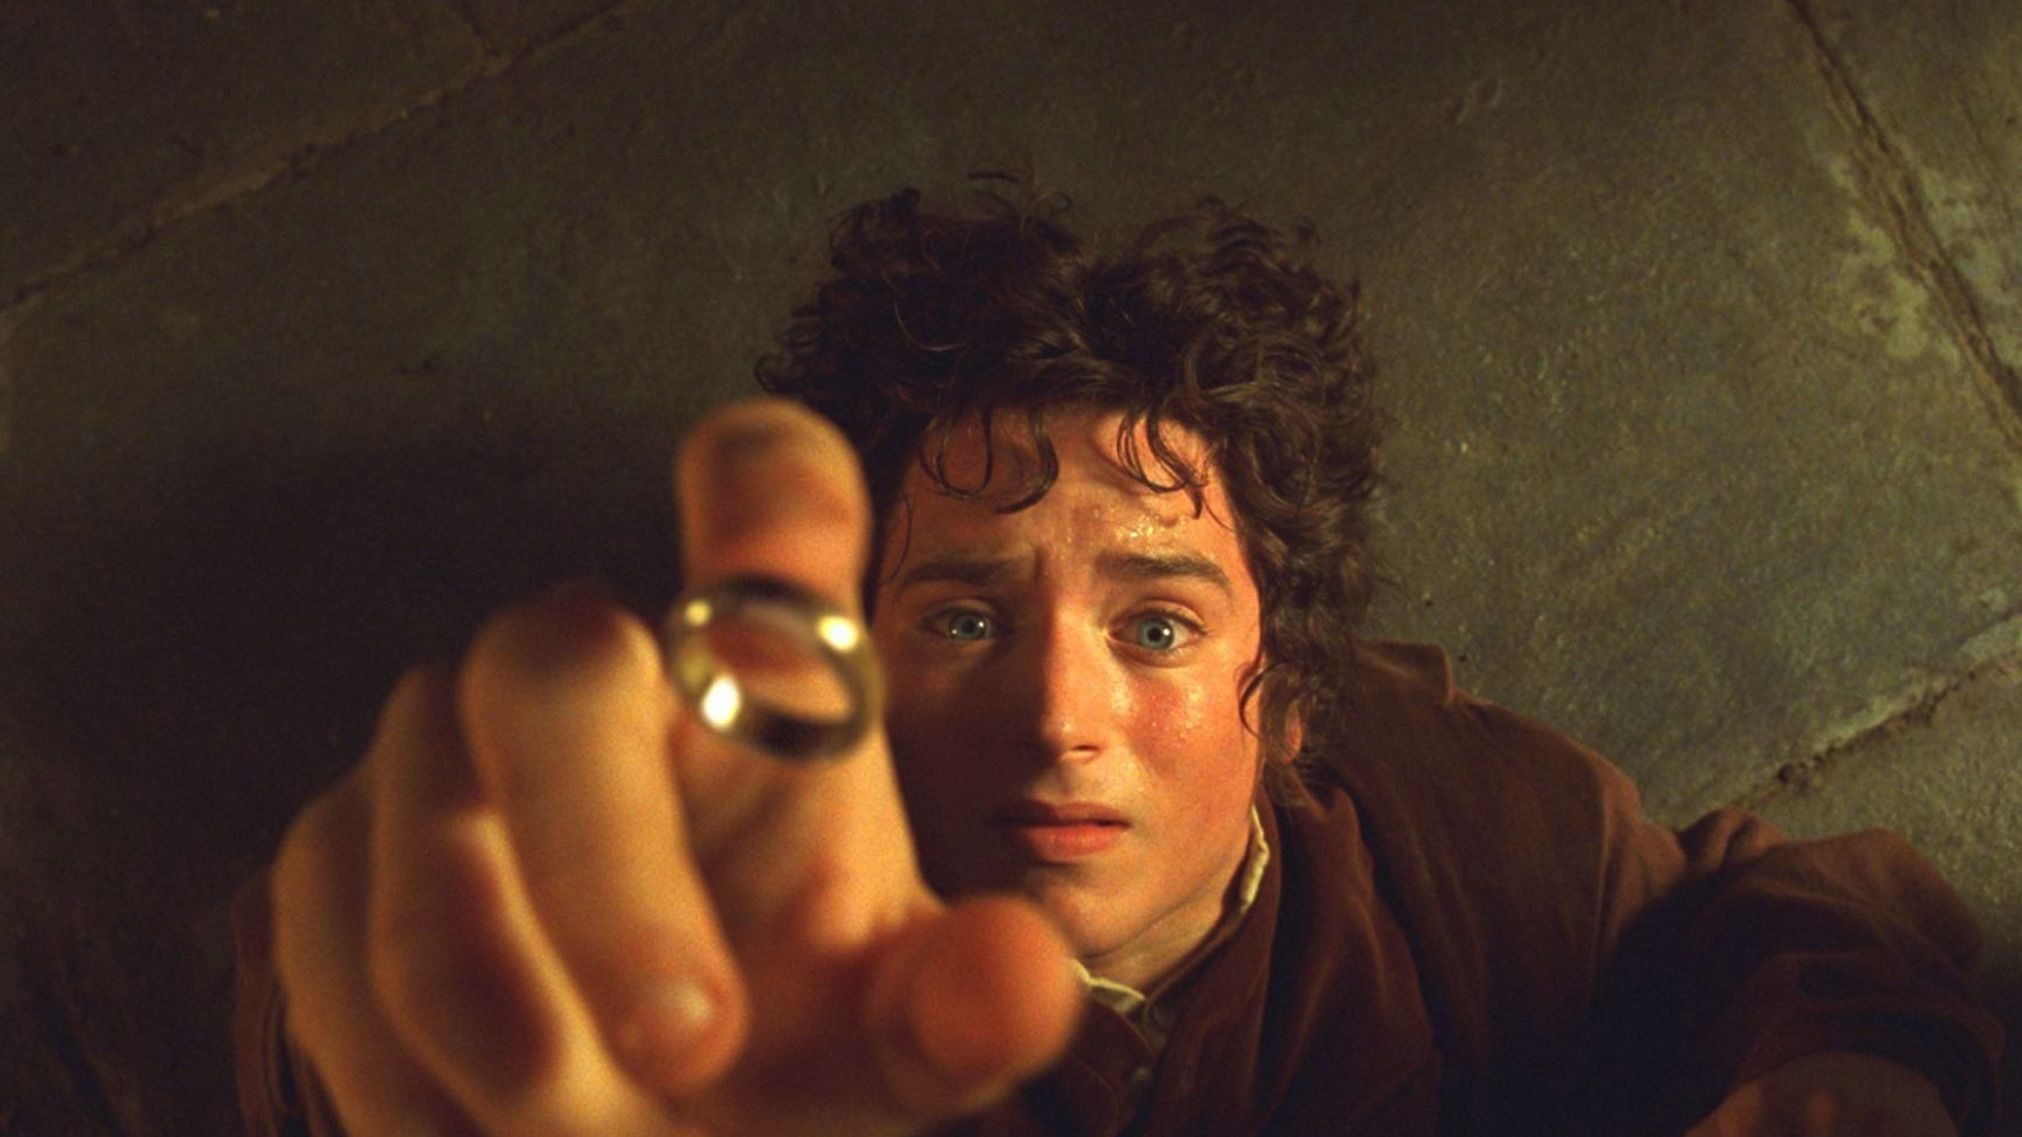 the lord of the rings ring of power in hand